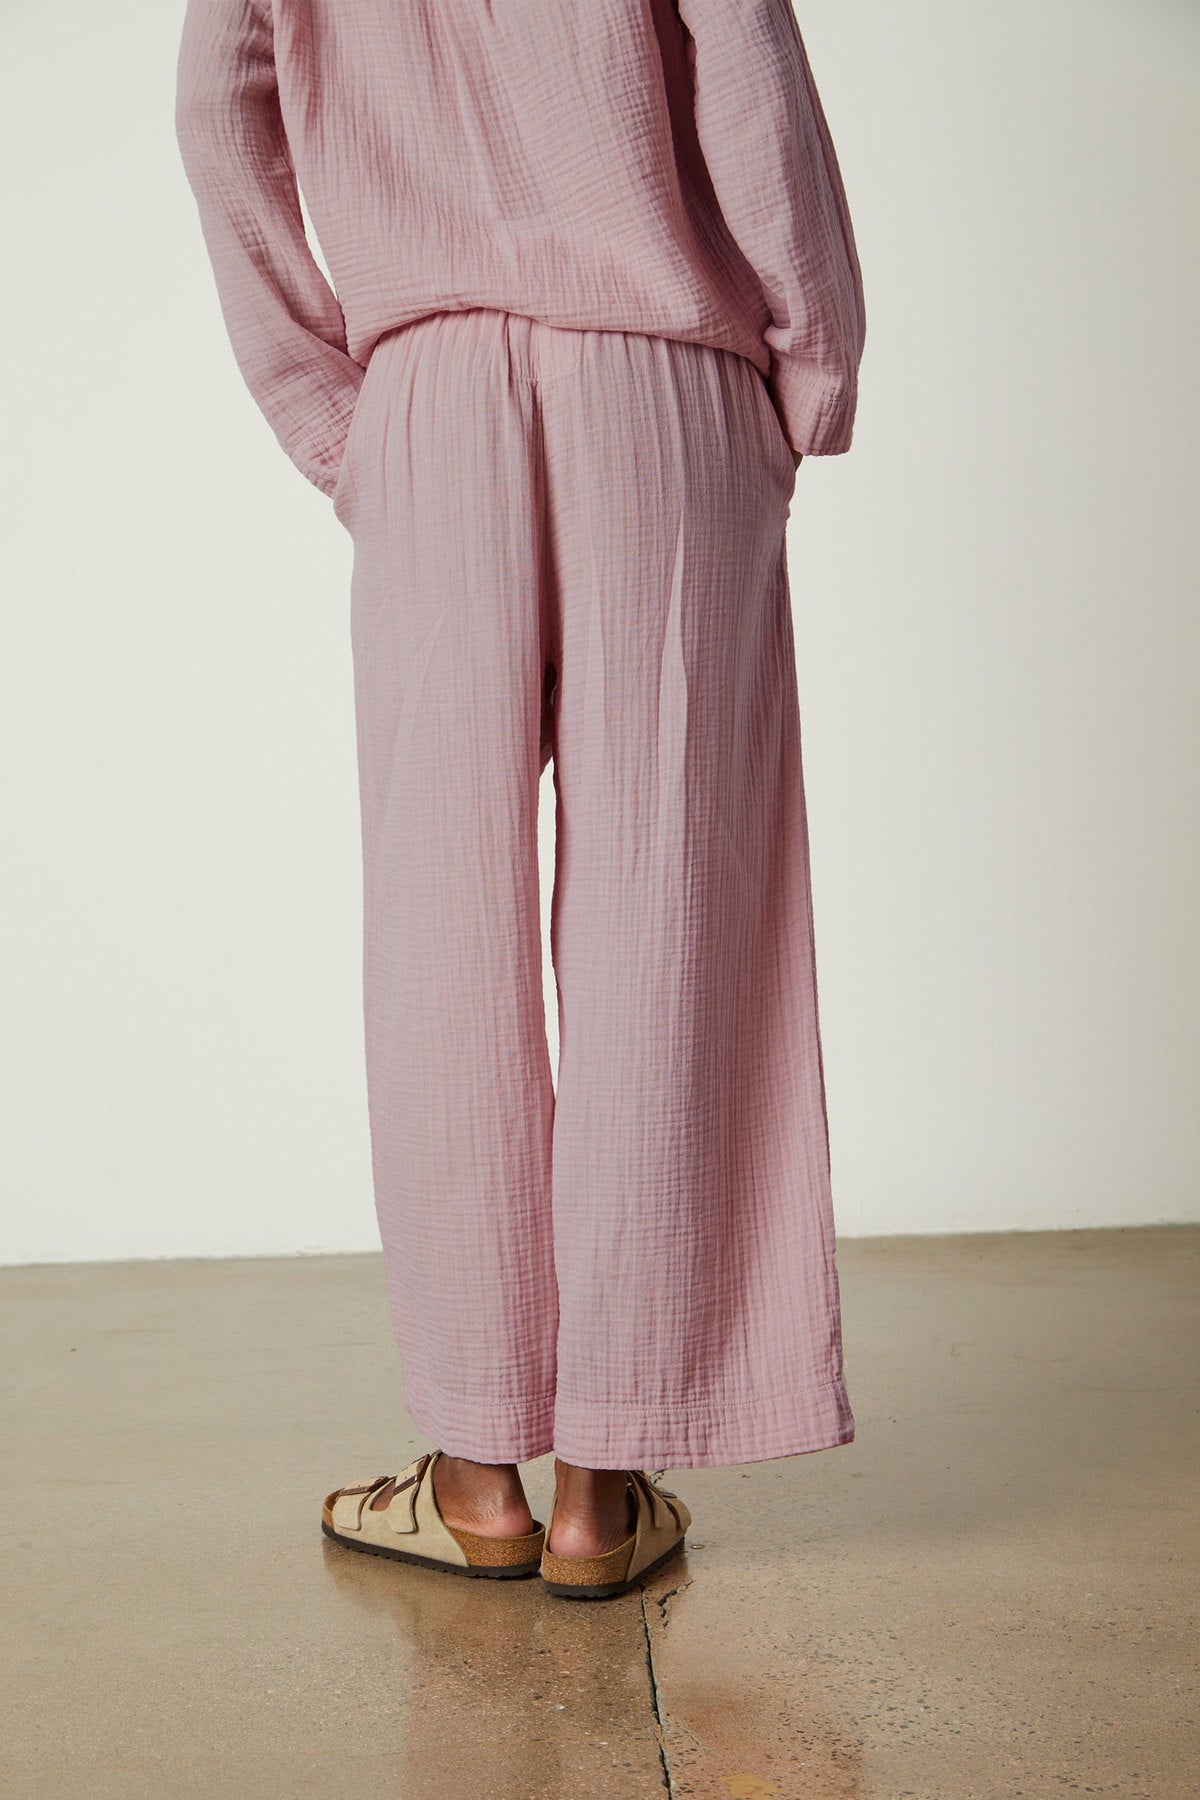 The back of a woman wearing the Jenny Graham Home pink PAJAMA PANT jumpsuit.-26311382630593